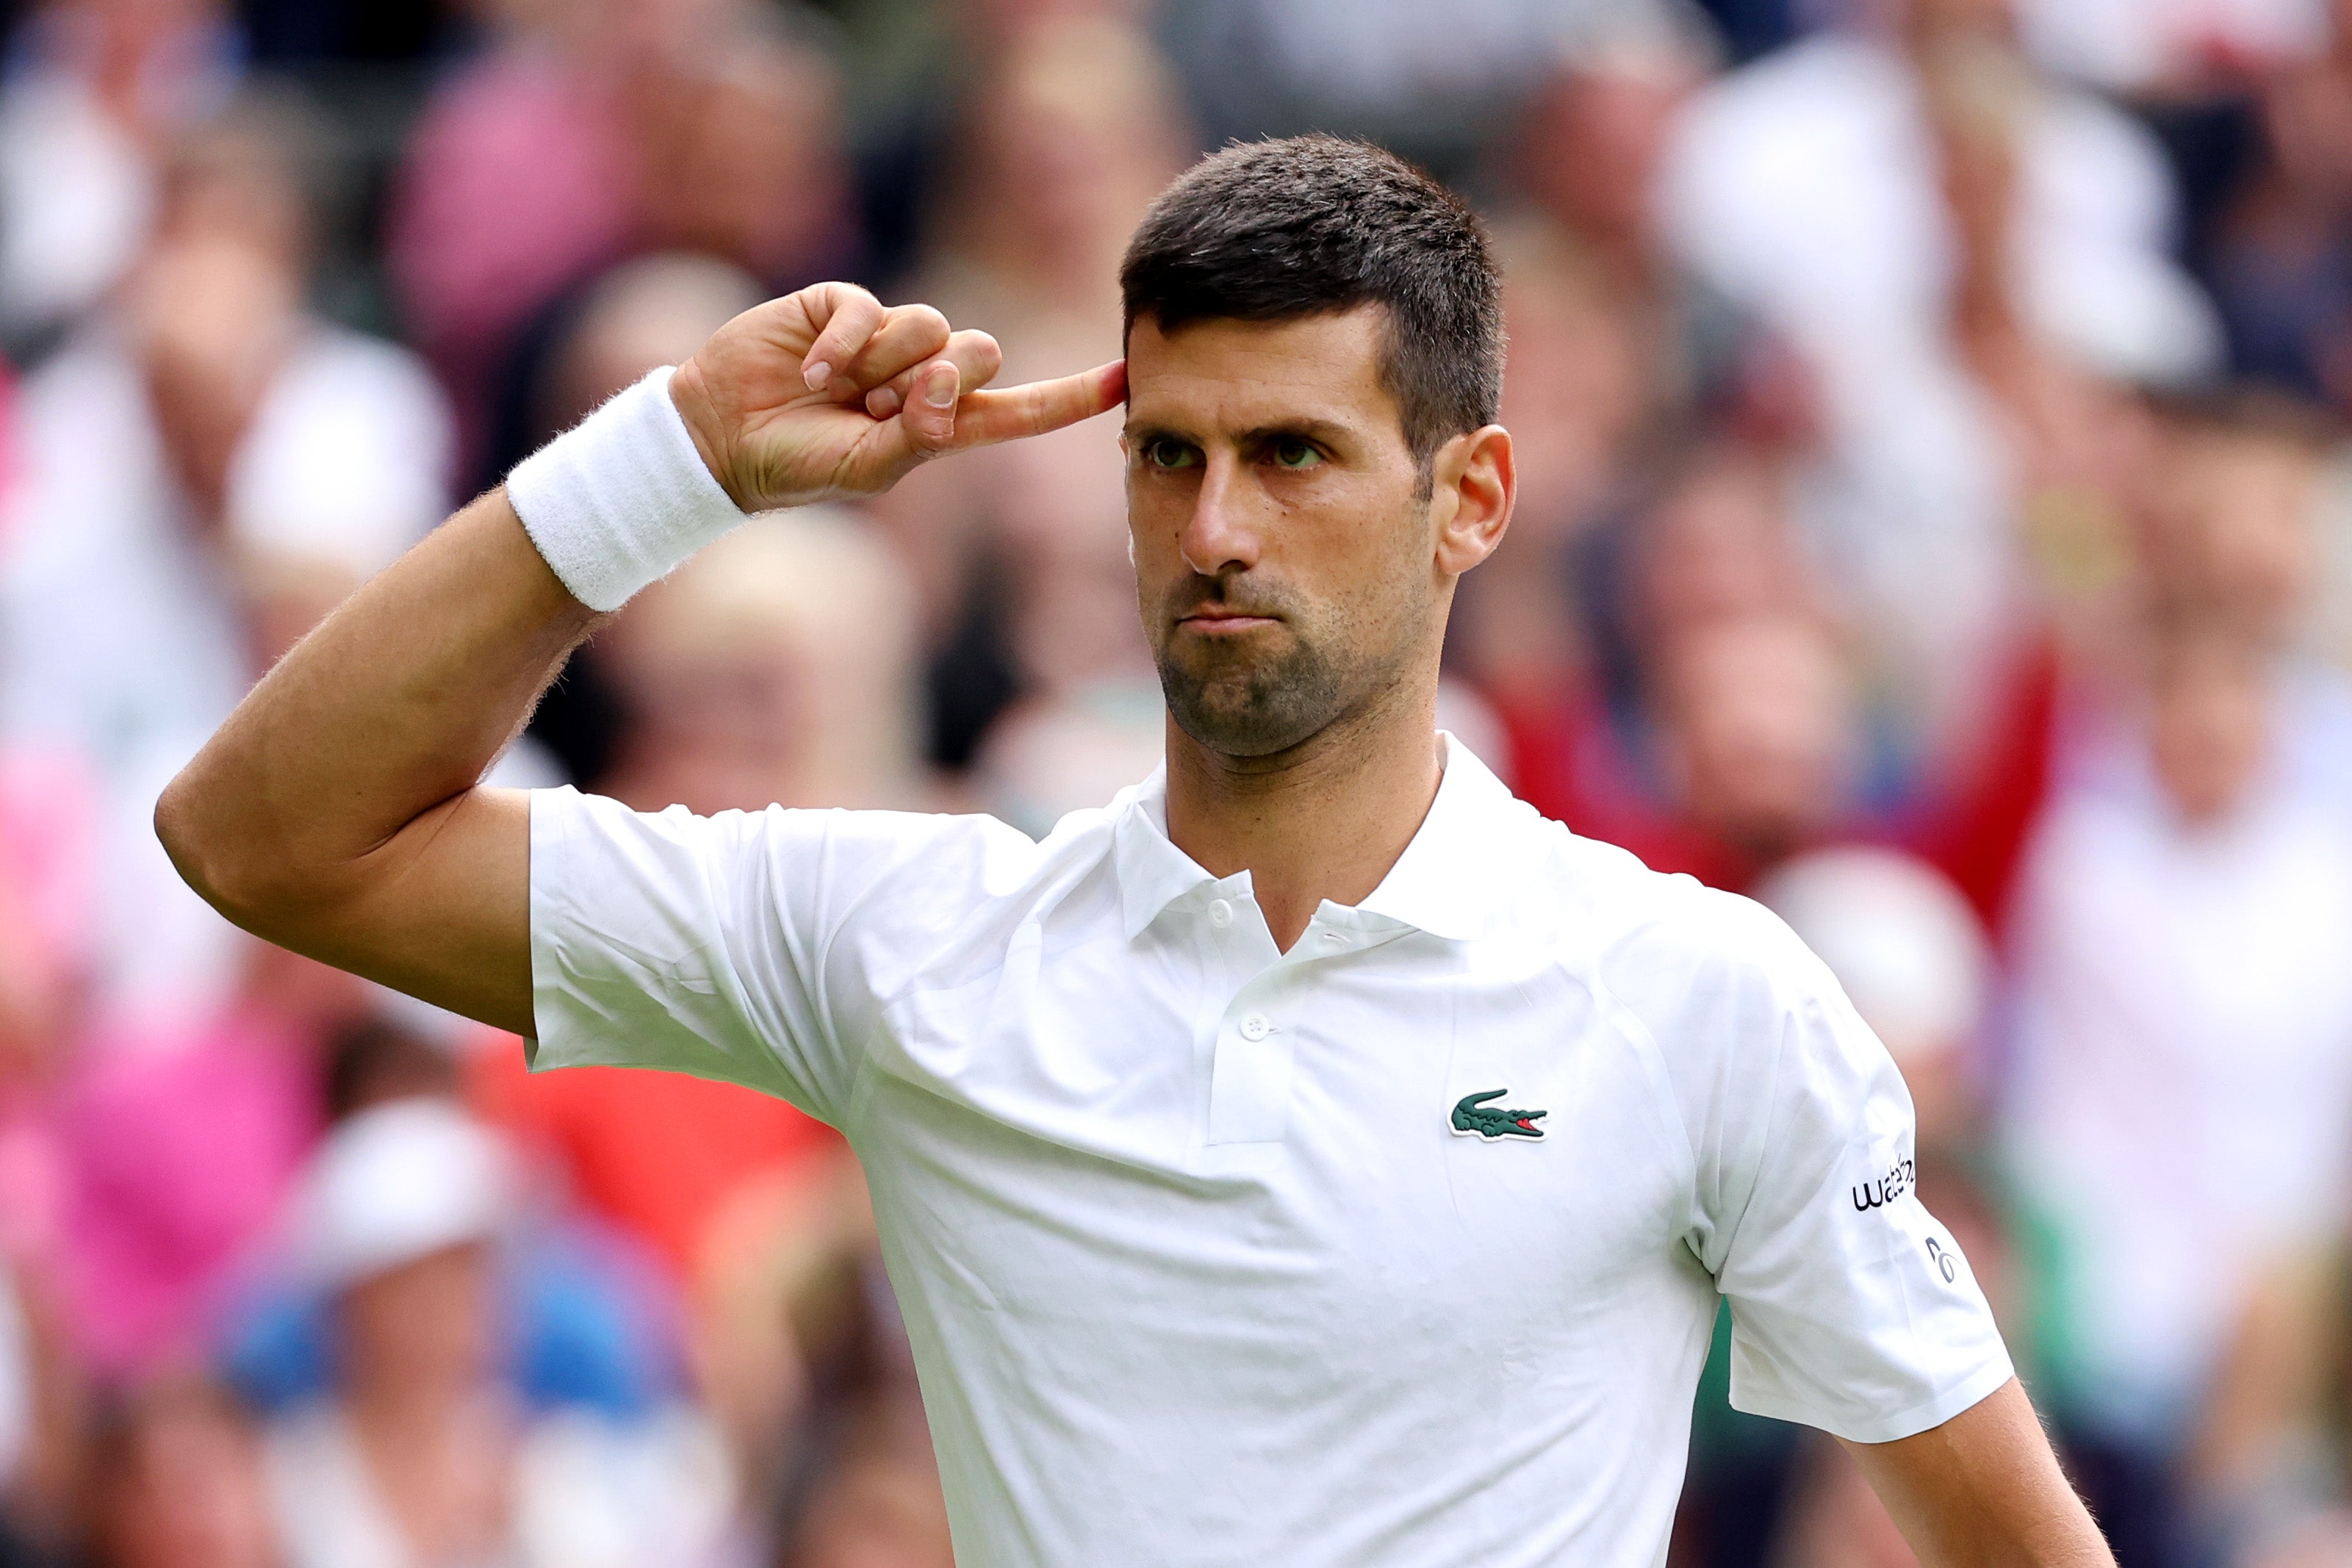 Novak Djokovic won his 23rd grand slam title at the French Open